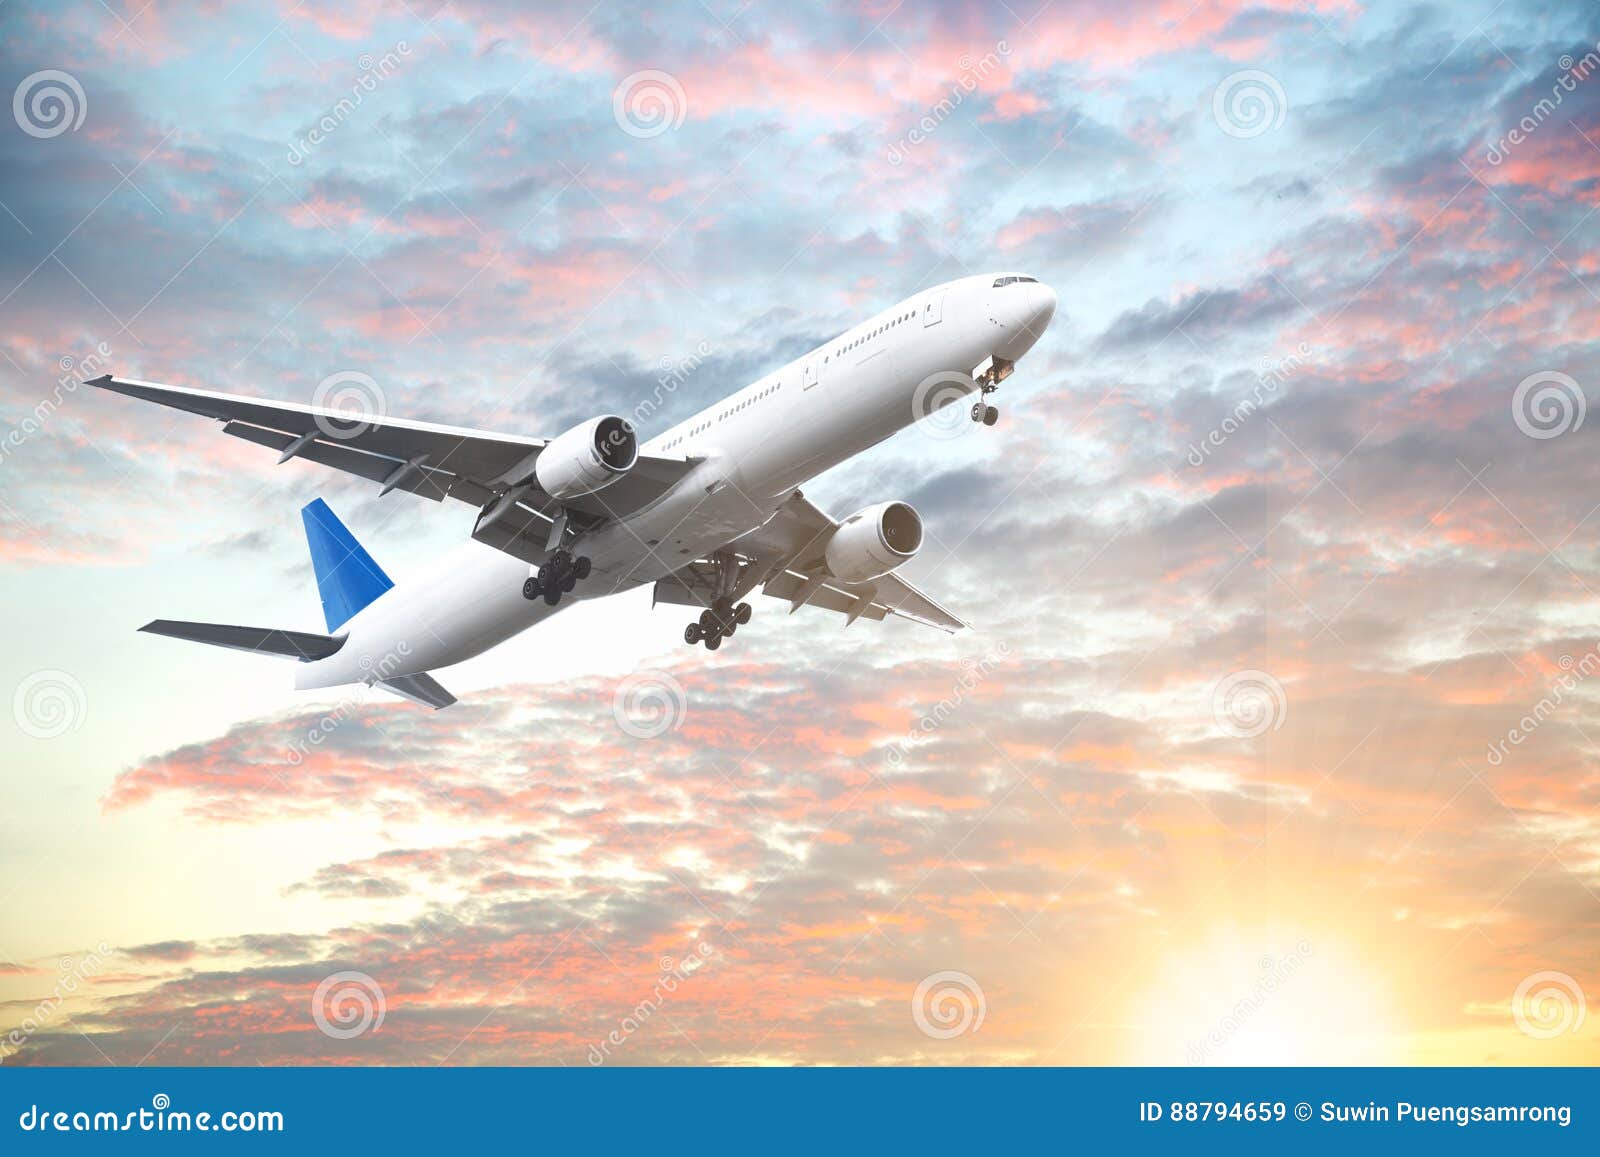 aeroplane flying in sunset sky with beautiful cloud